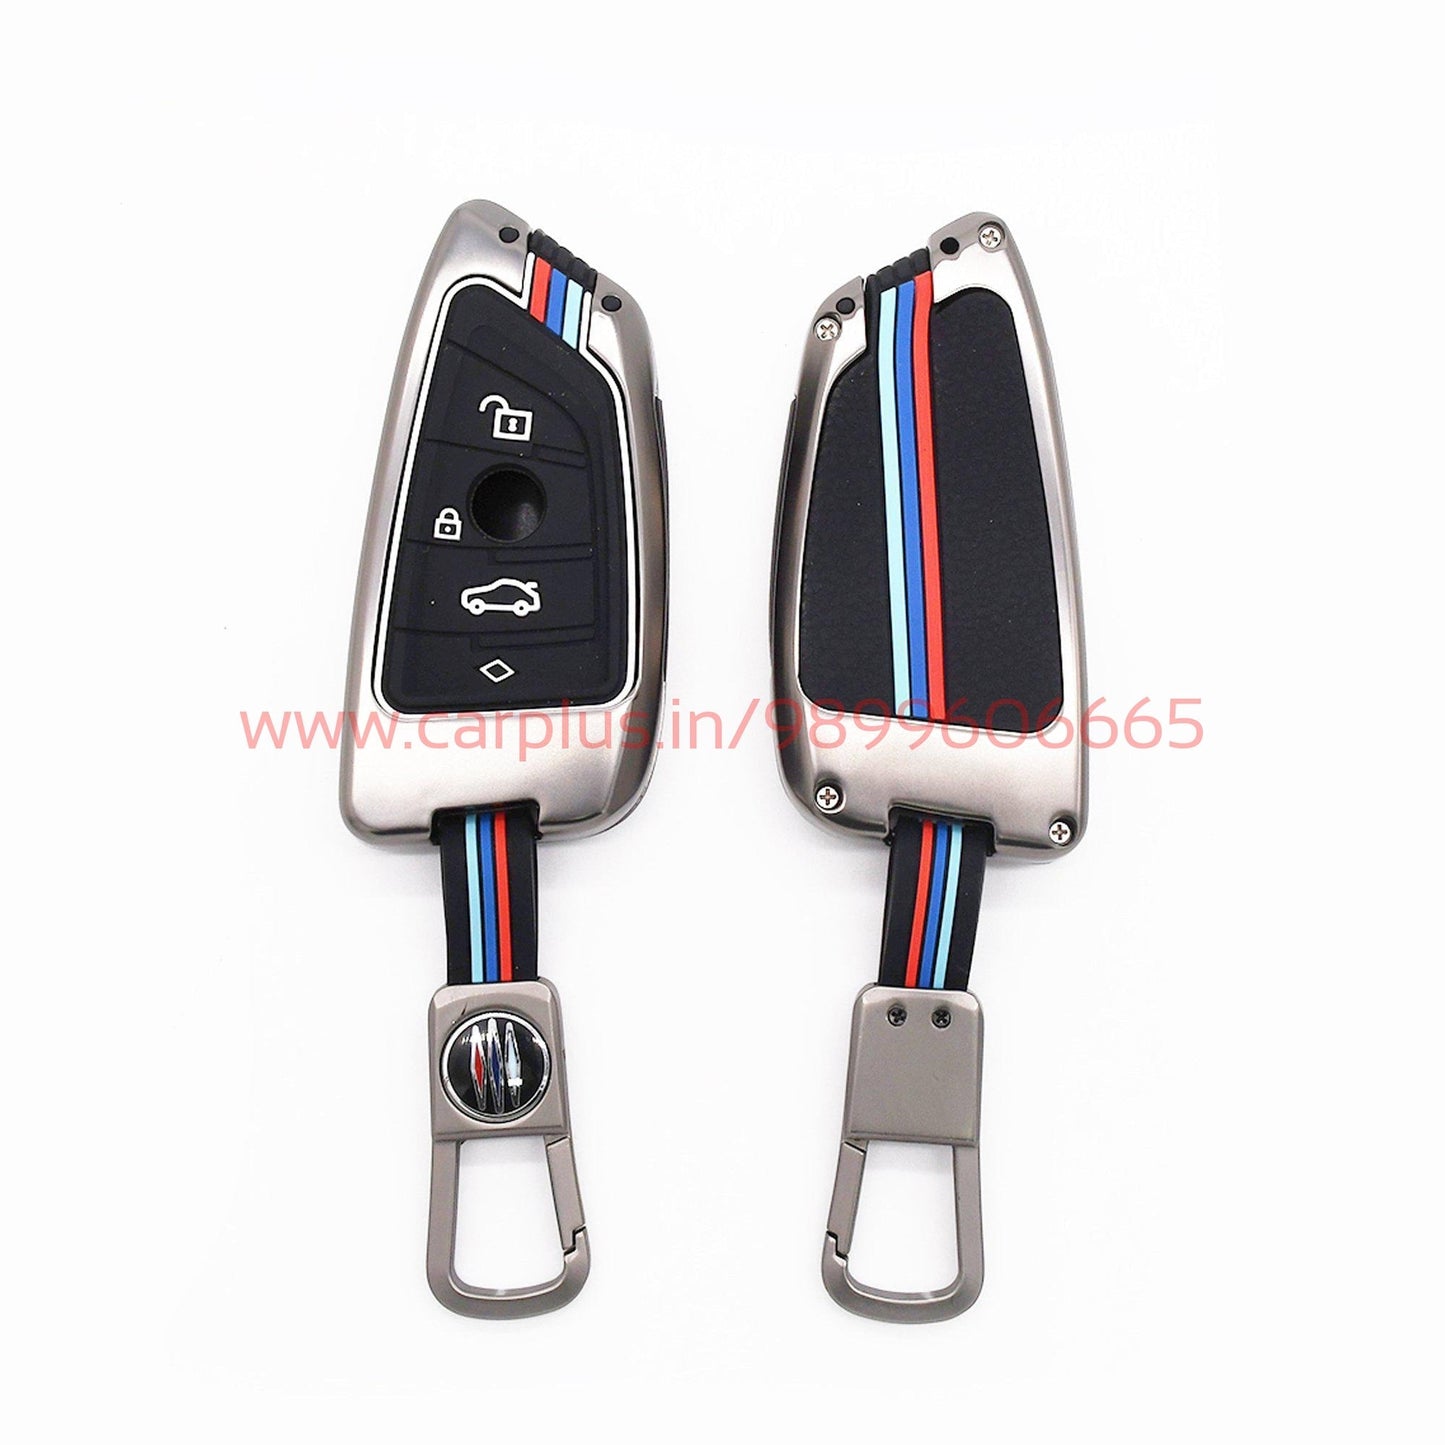 KMH Metal With Silicone Car Key Cover for BMW (D1) – CARPLUS